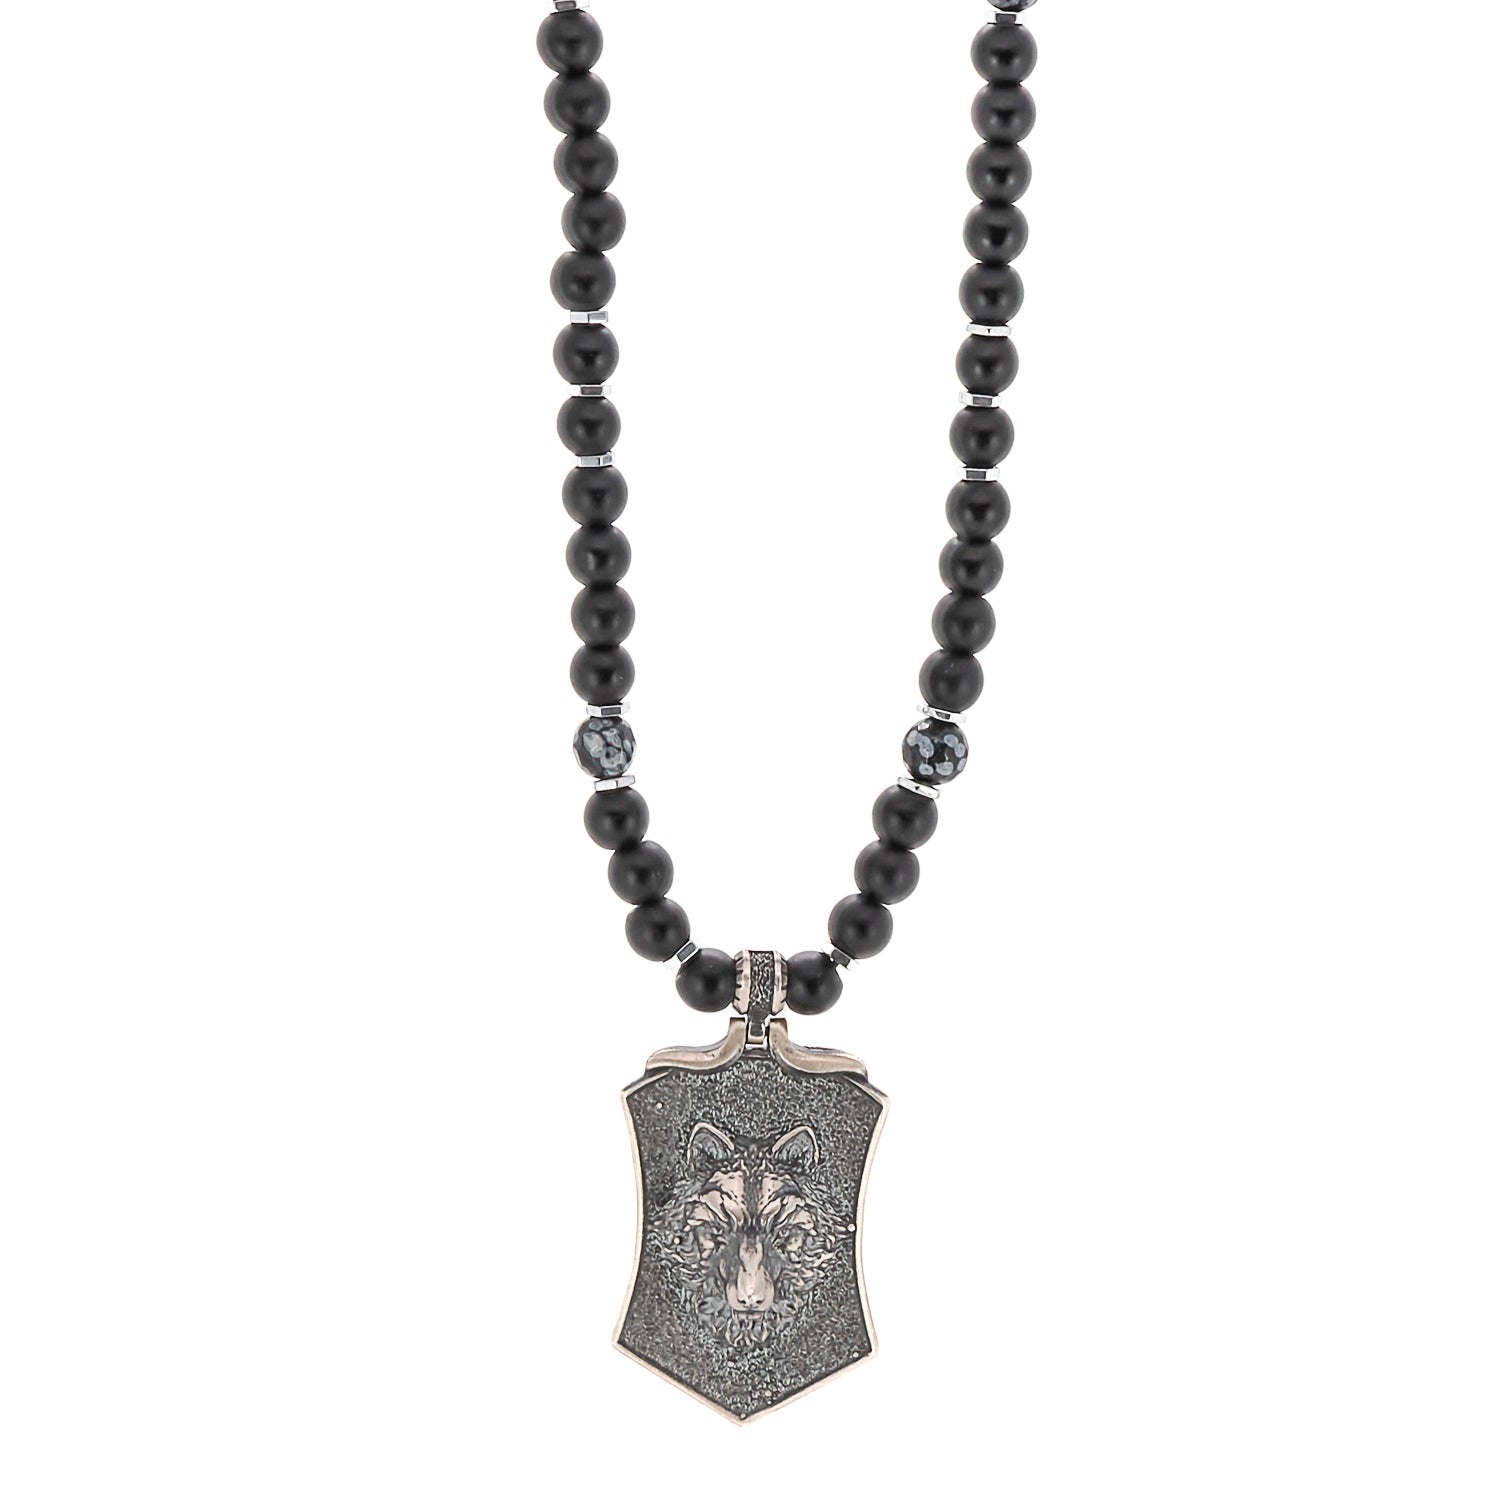 Explore the captivating beauty of the Spirit Onyx Wolf Necklace, a unique and meaningful handmade jewelry piece.